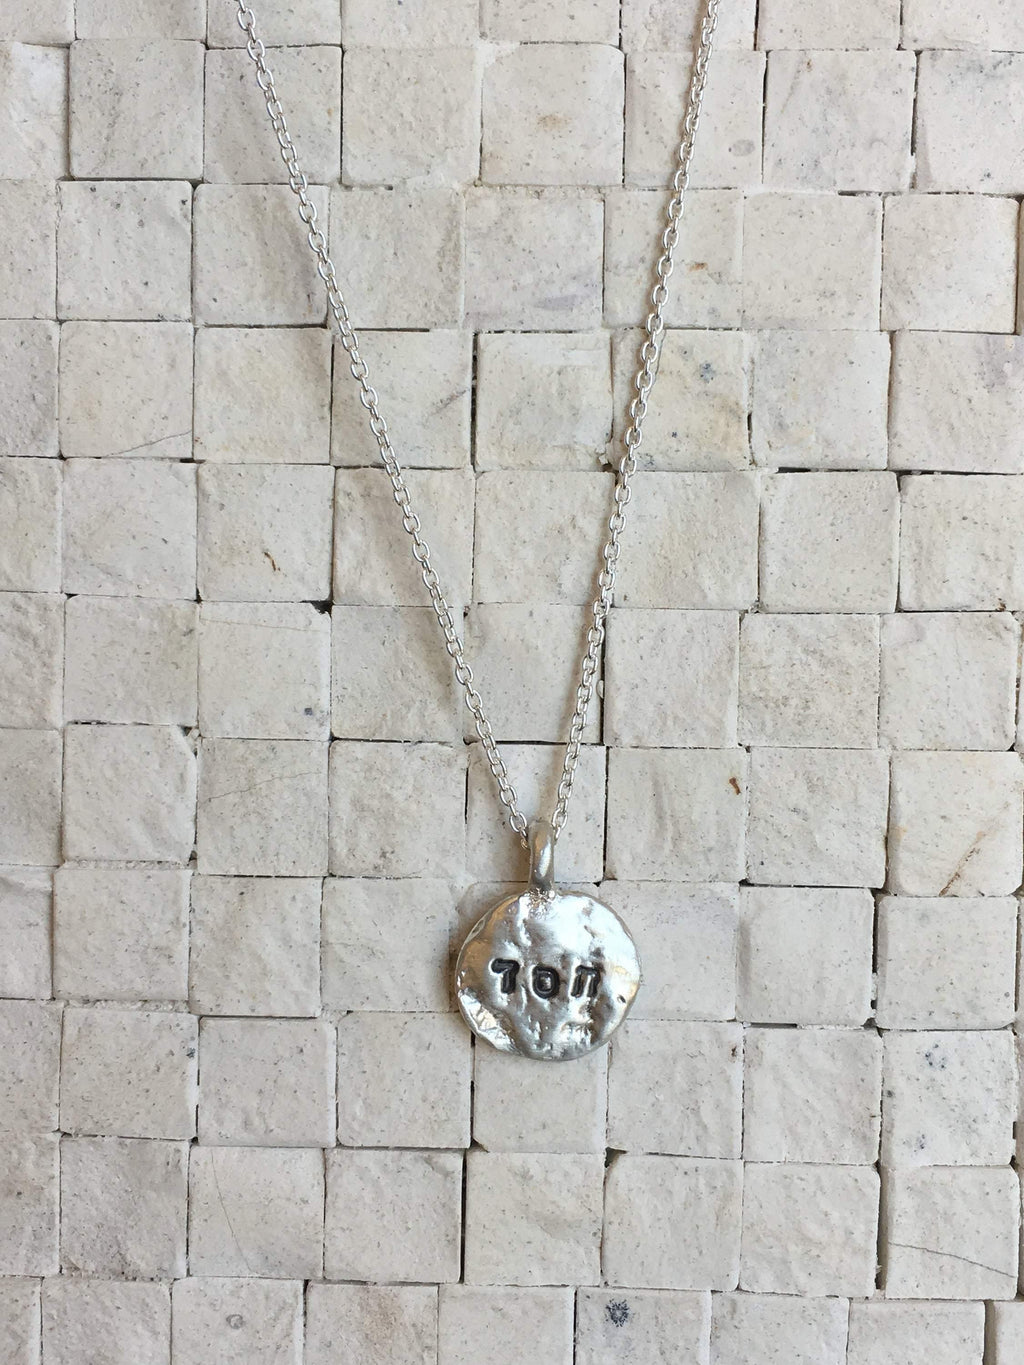 May God Bless You and Protect You - Imprint Necklace